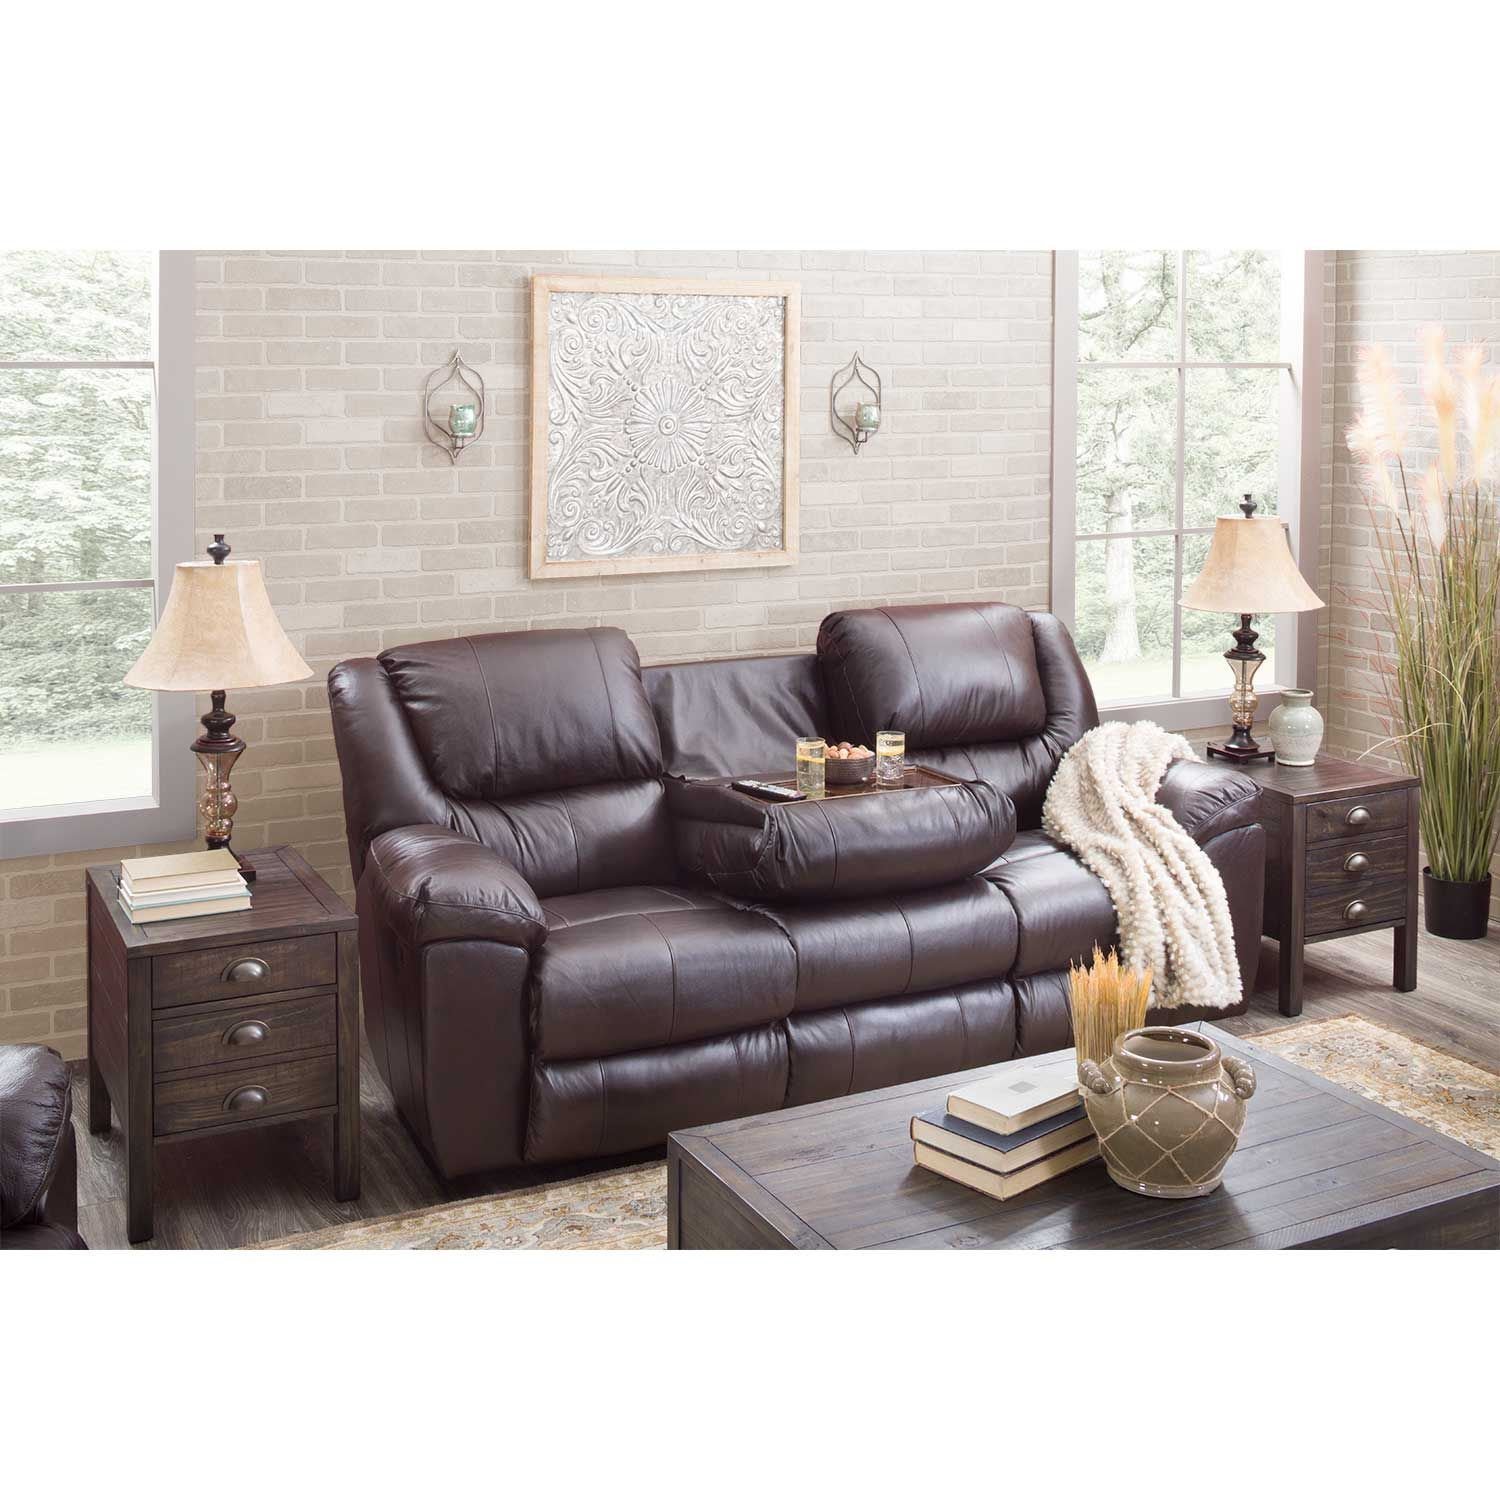 American Leather Pileus European-Style Fully Adjustable Swivel Glider  Recliner and Ottoman - Large Size, Sprintz Furniture